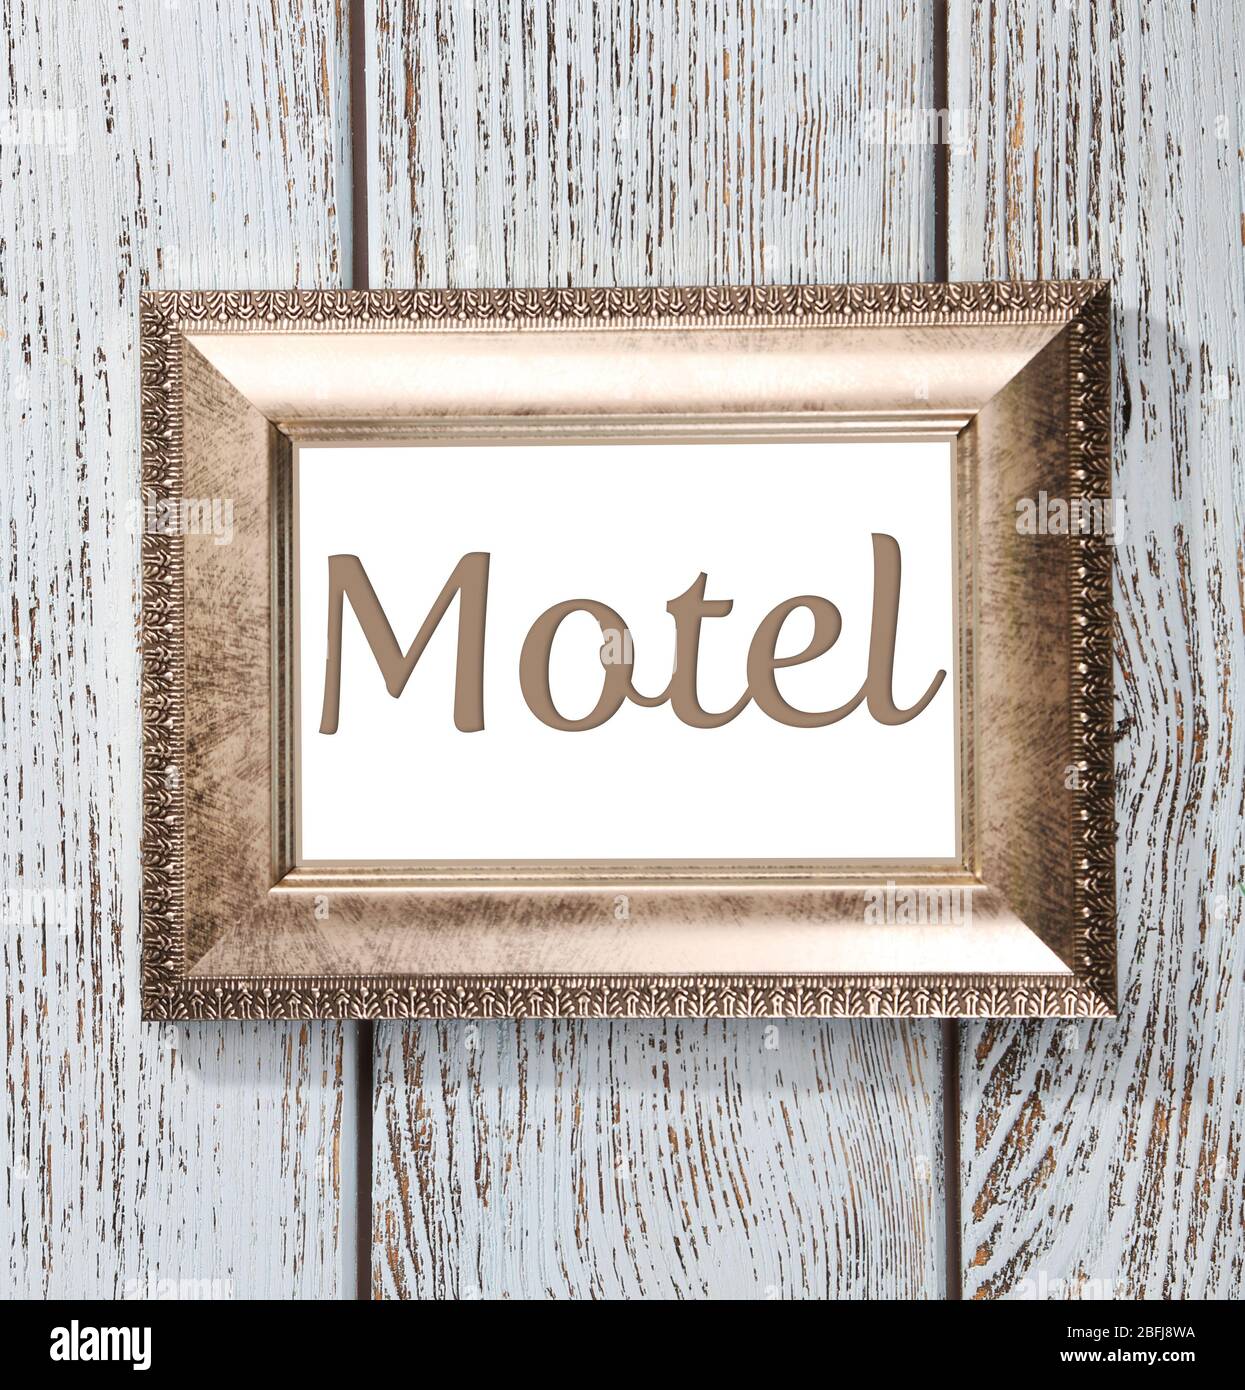 Word Motel in frame on wooden background Stock Photo